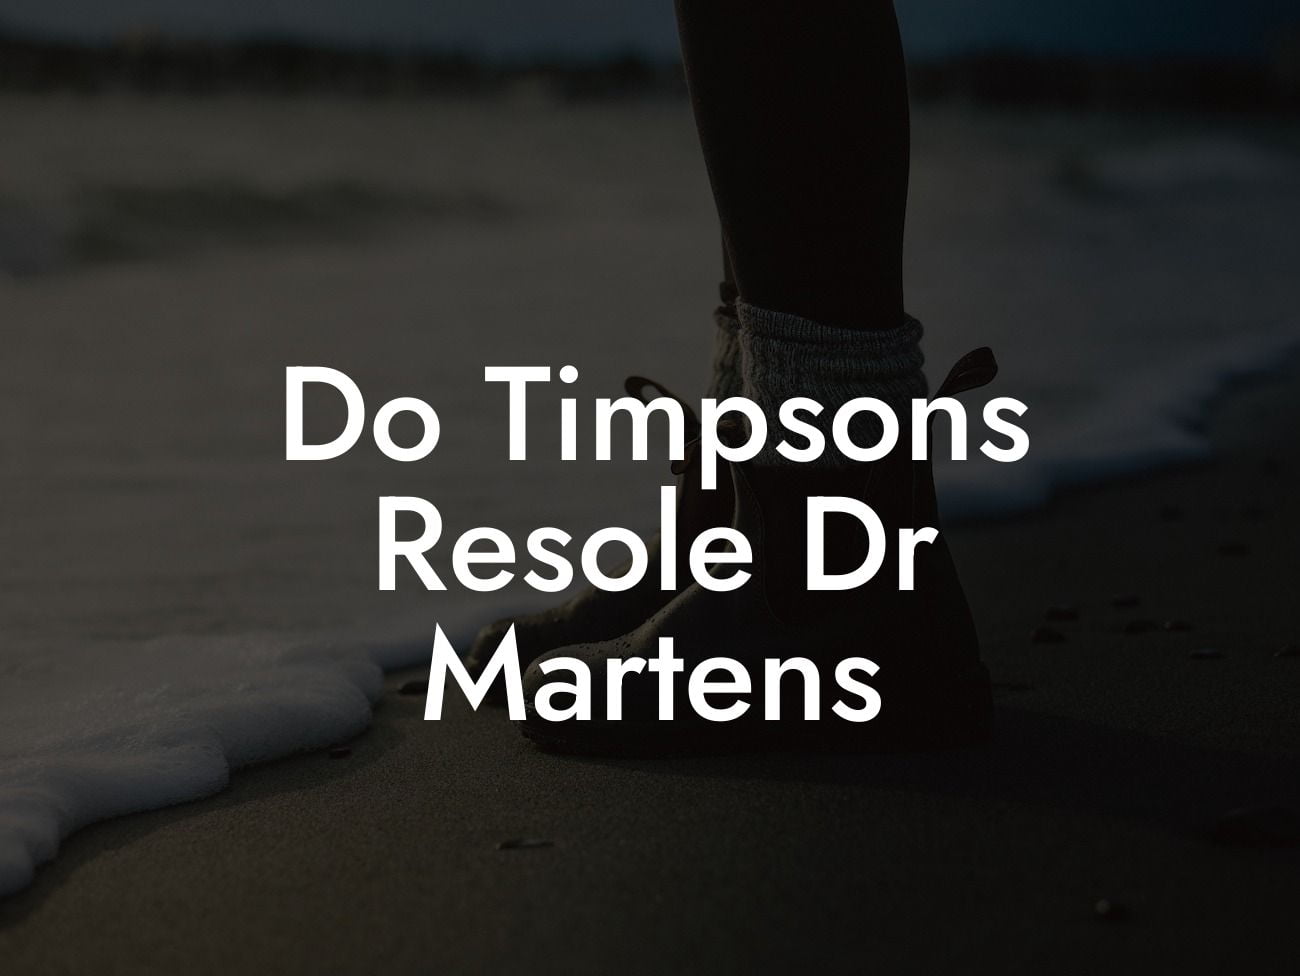 Do Timpsons Resole Dr Martens